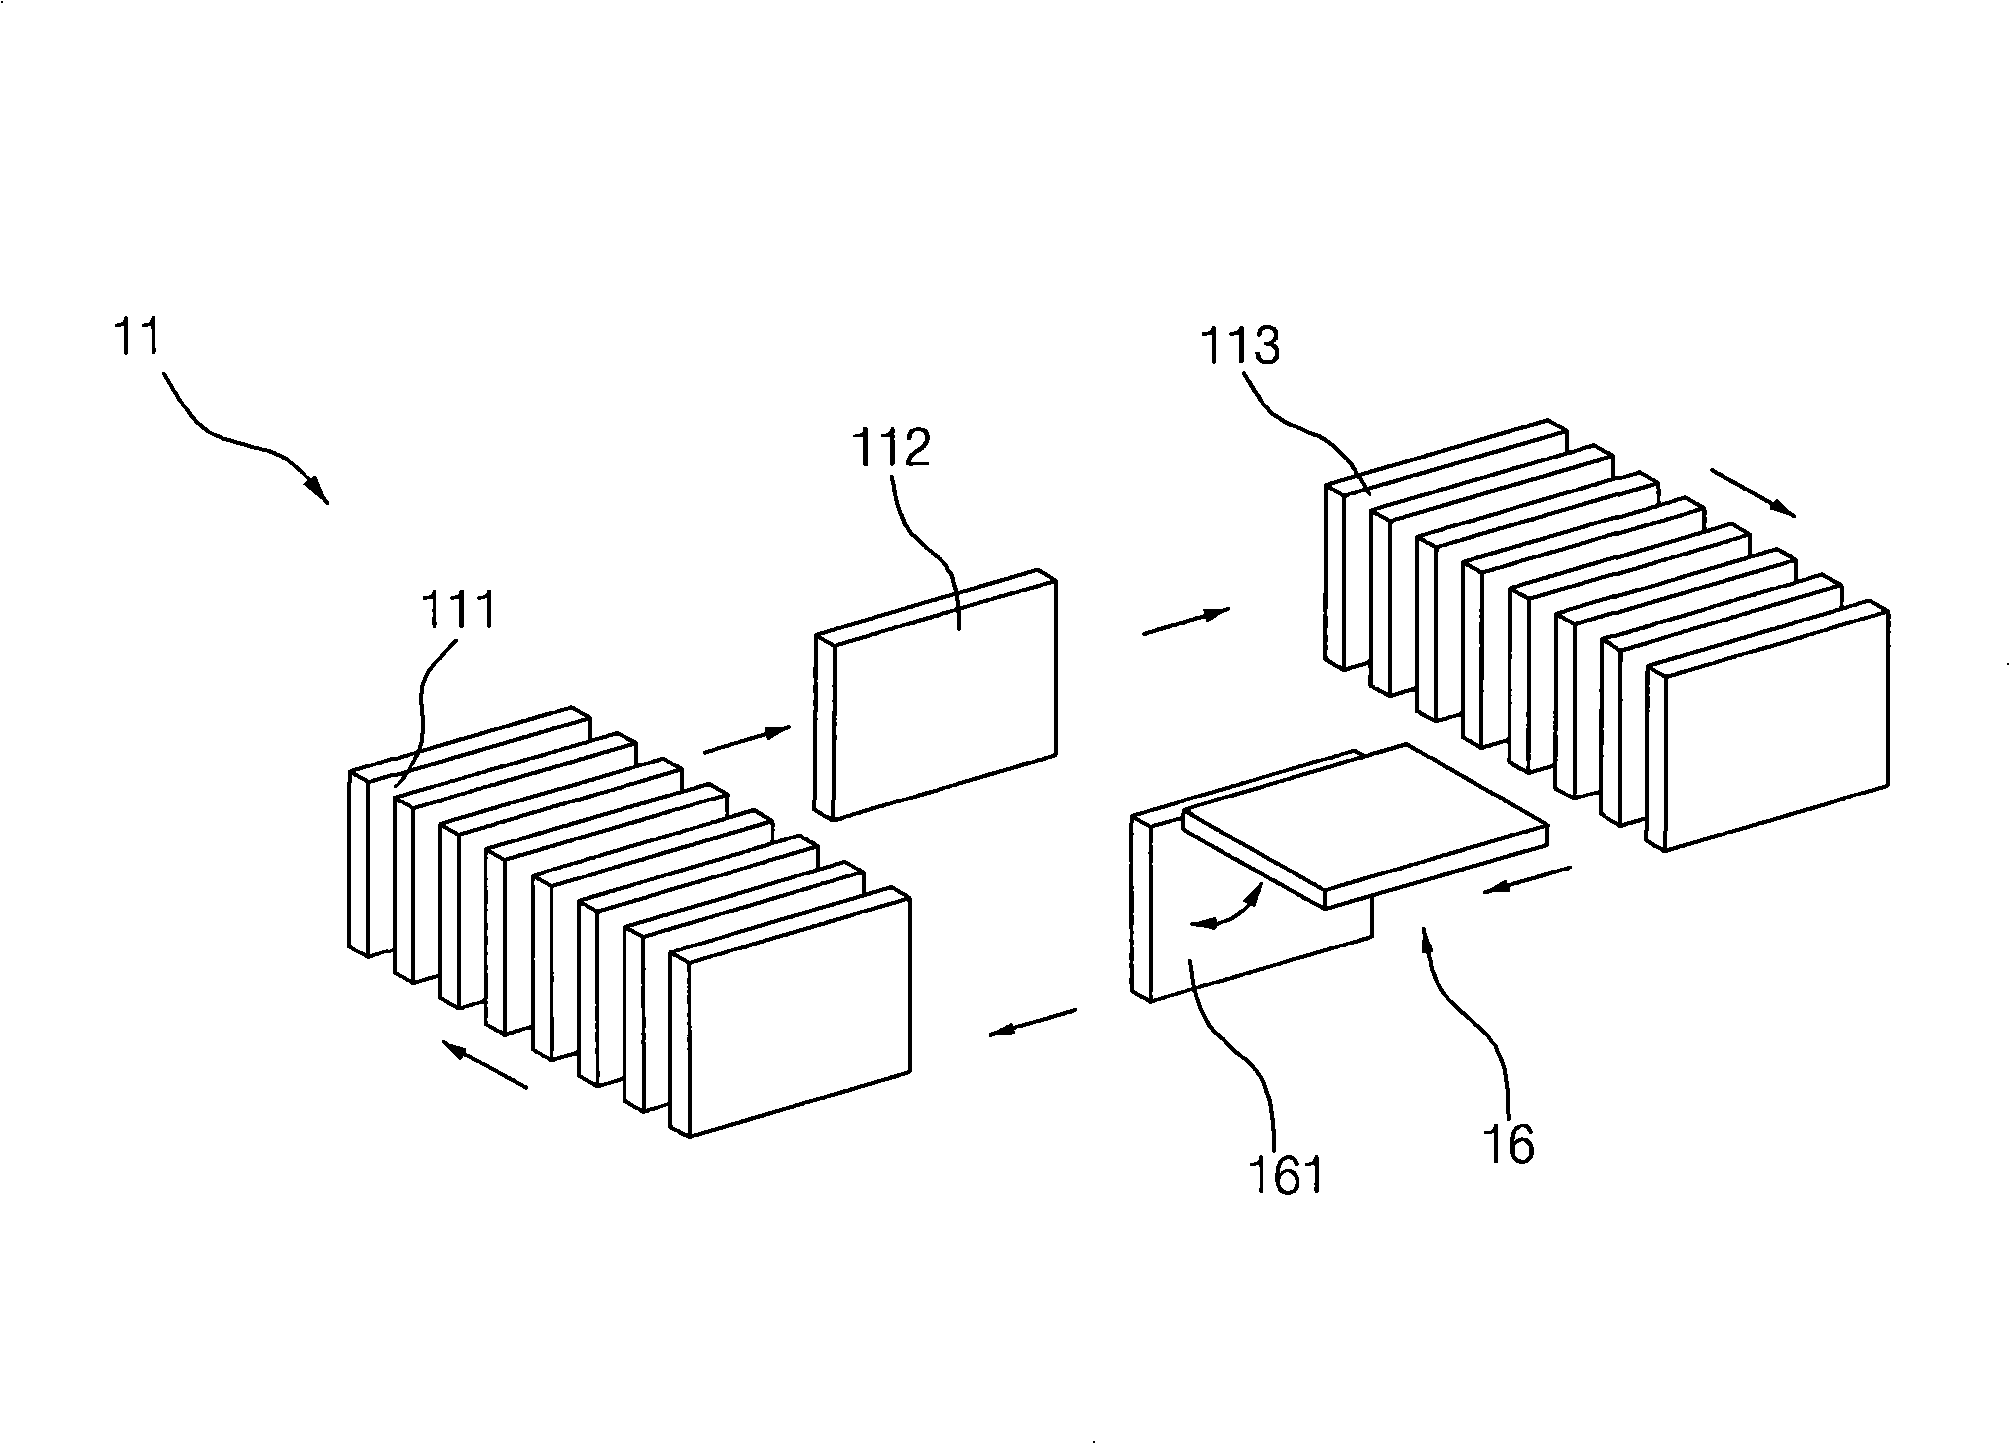 Processor, test tray transfer method and package chip manufacture method